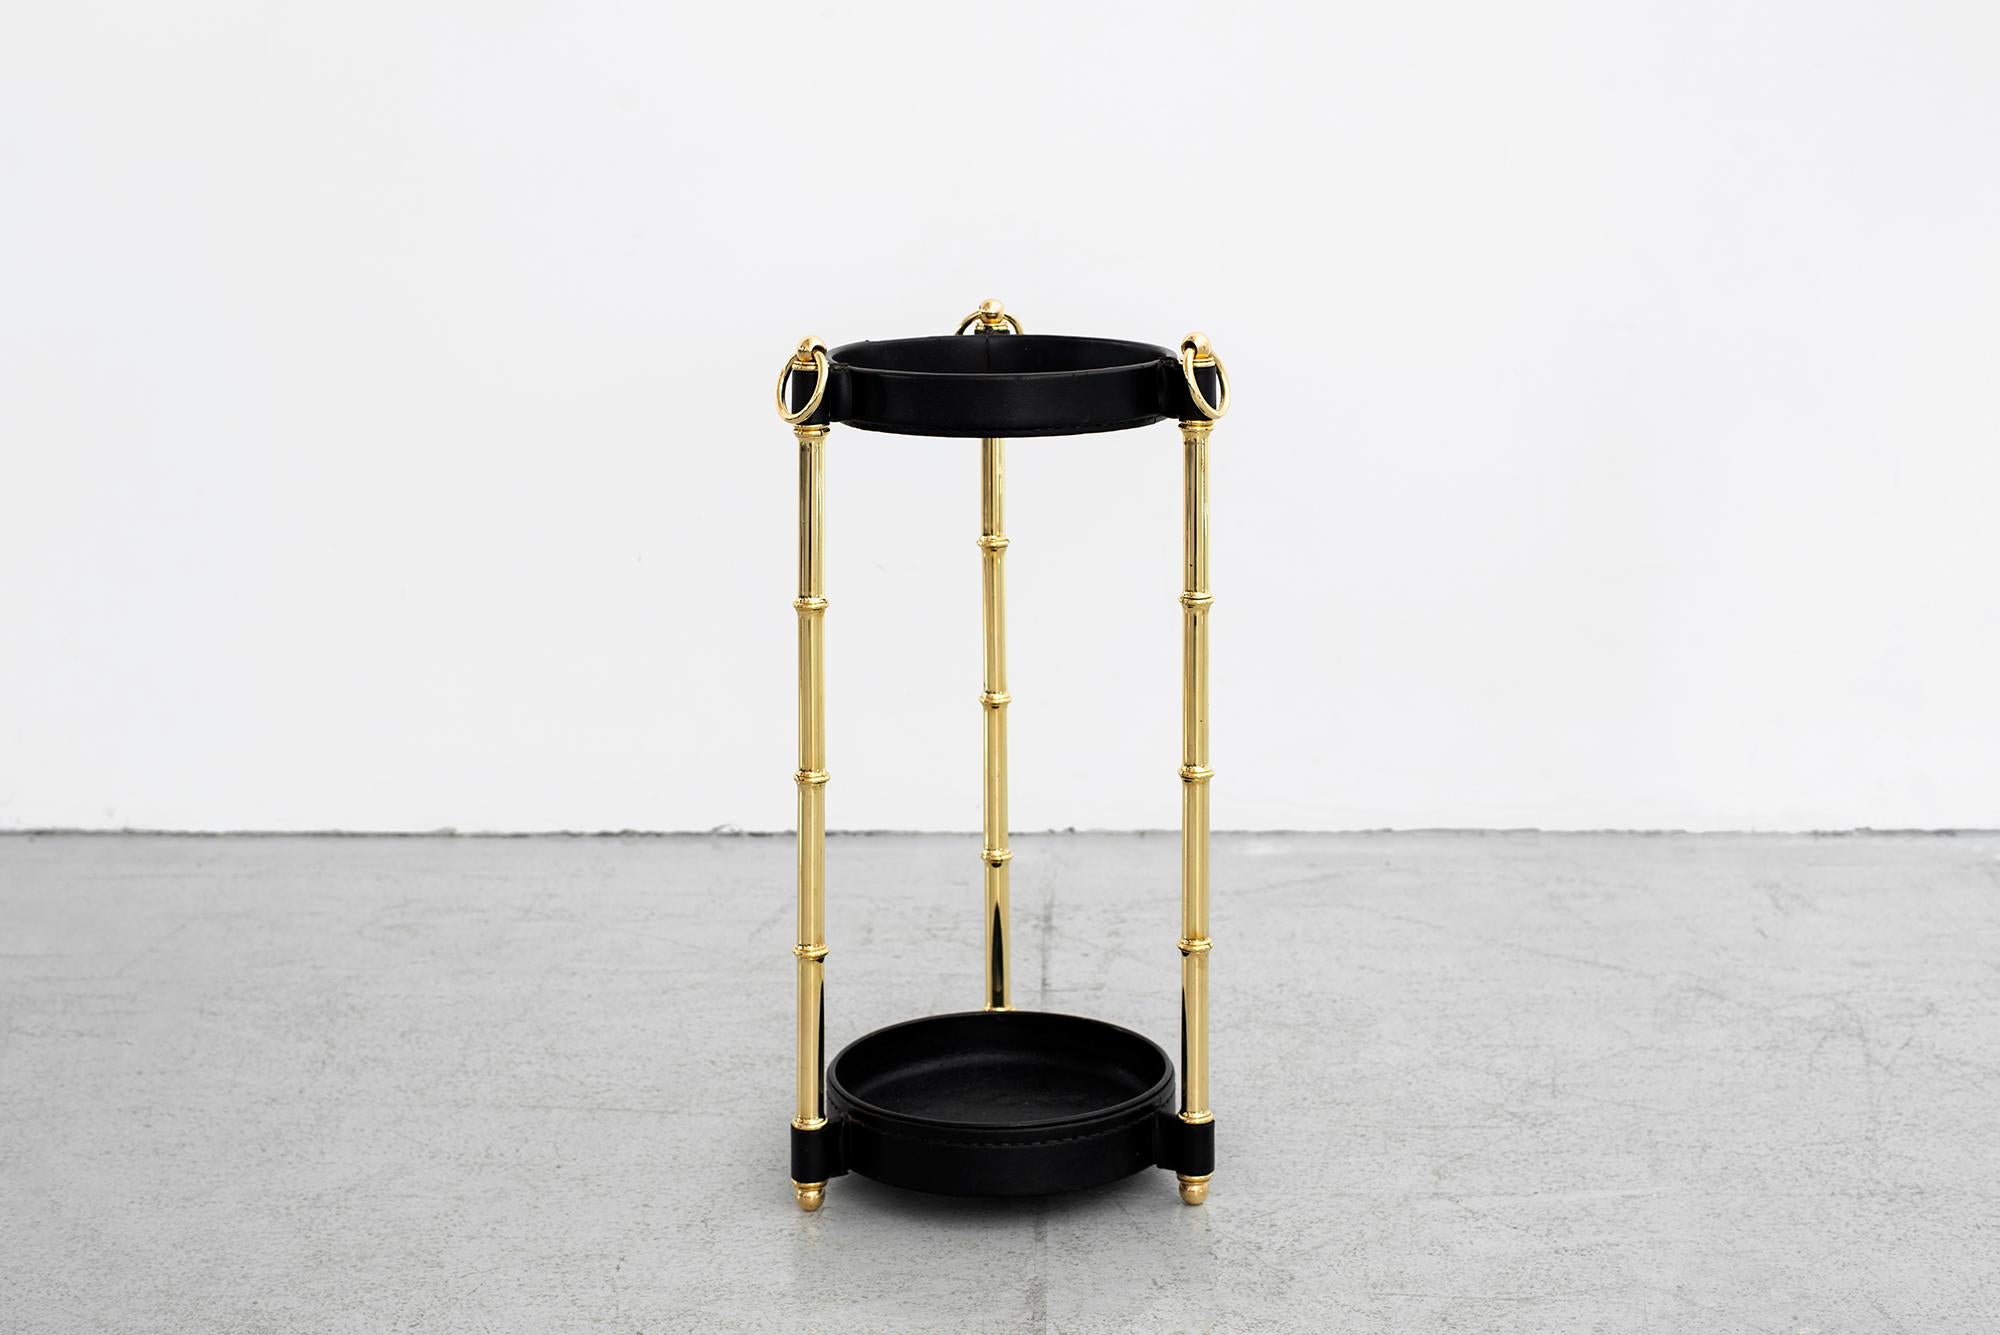 Handsome leather and brass bamboo umbrella stand by Jacques Adnet.
Brass and black leather with signature contrast stitching.